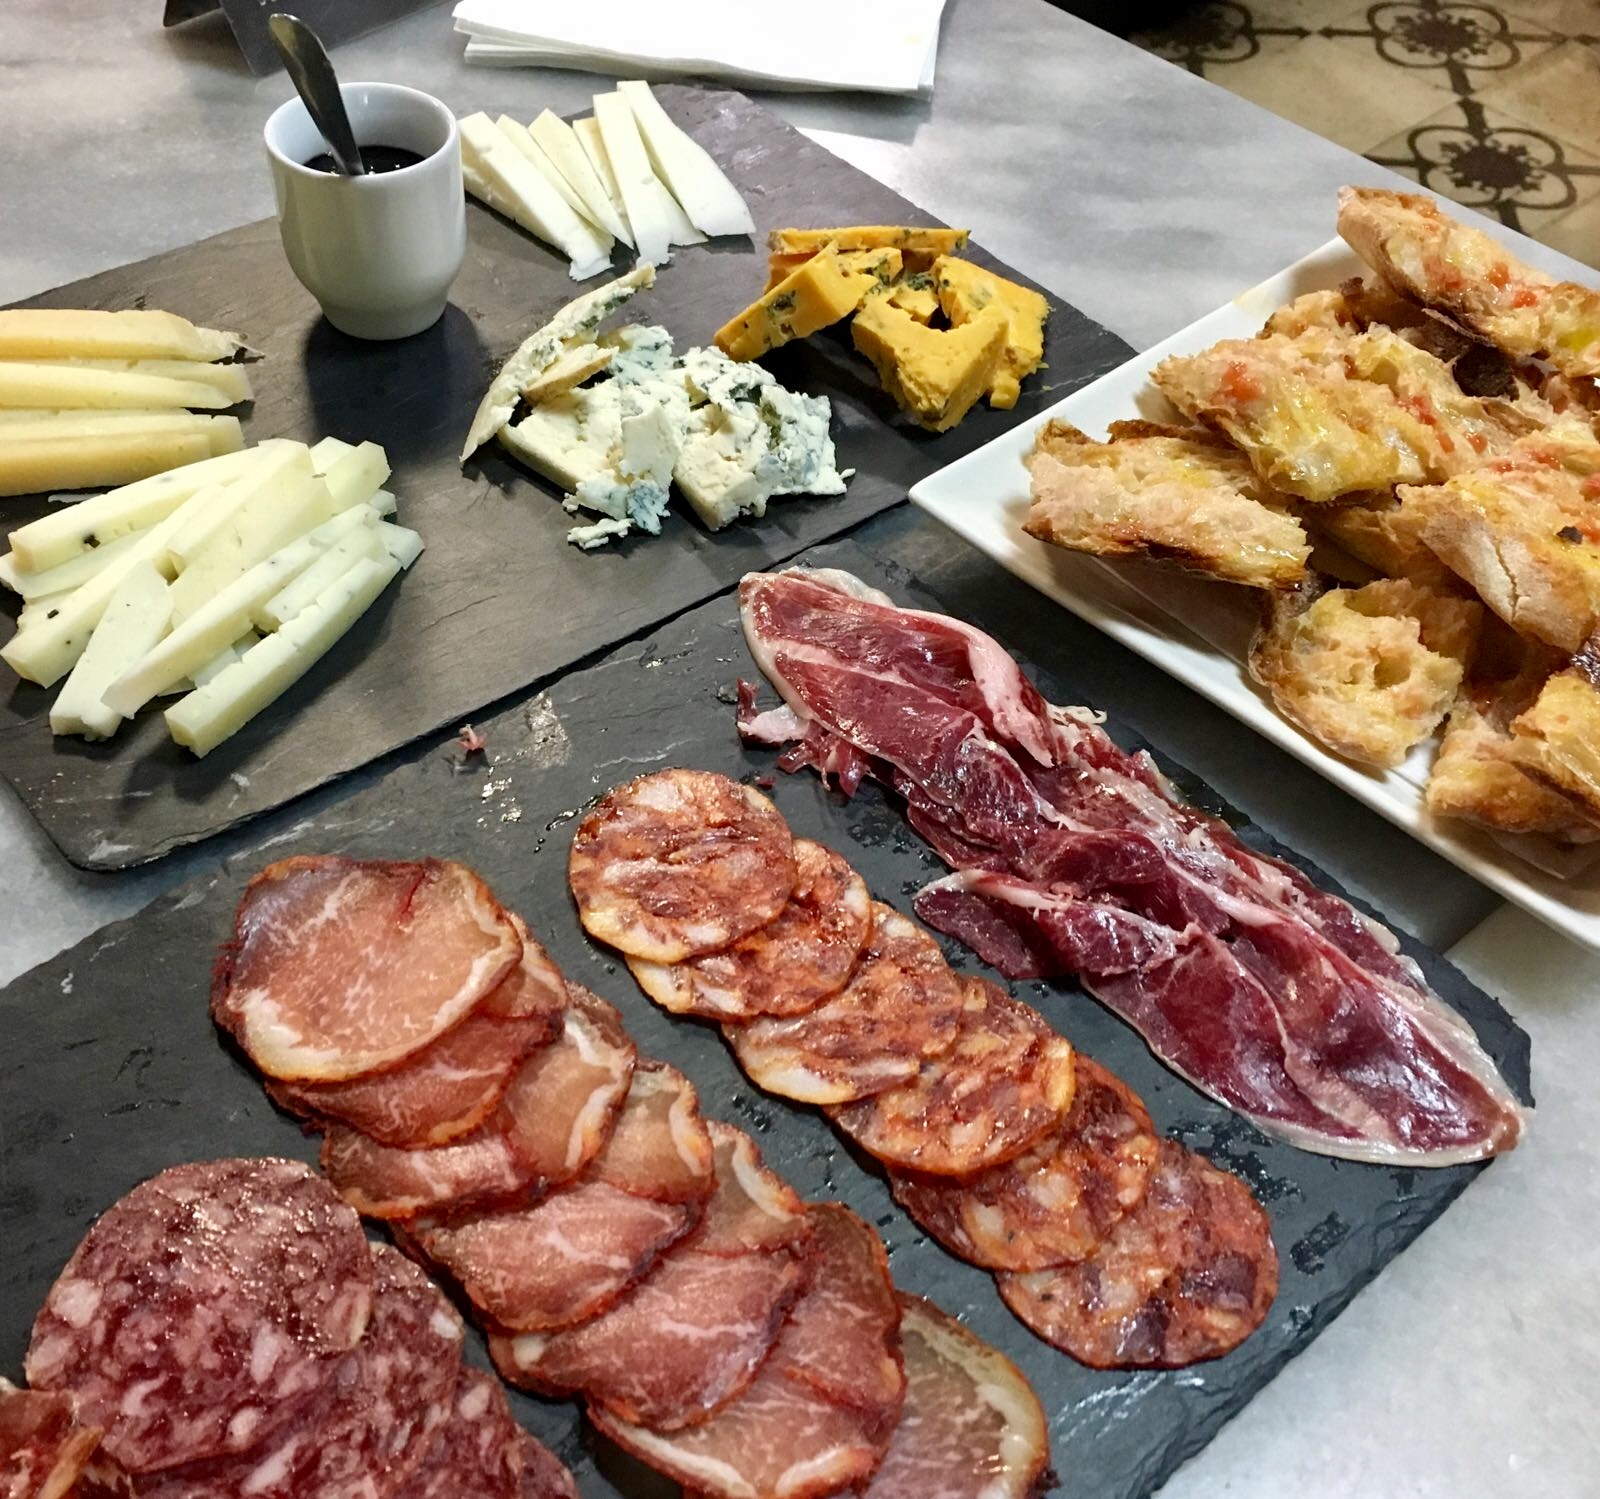 Which of these Spanish cured meats is your favorite?